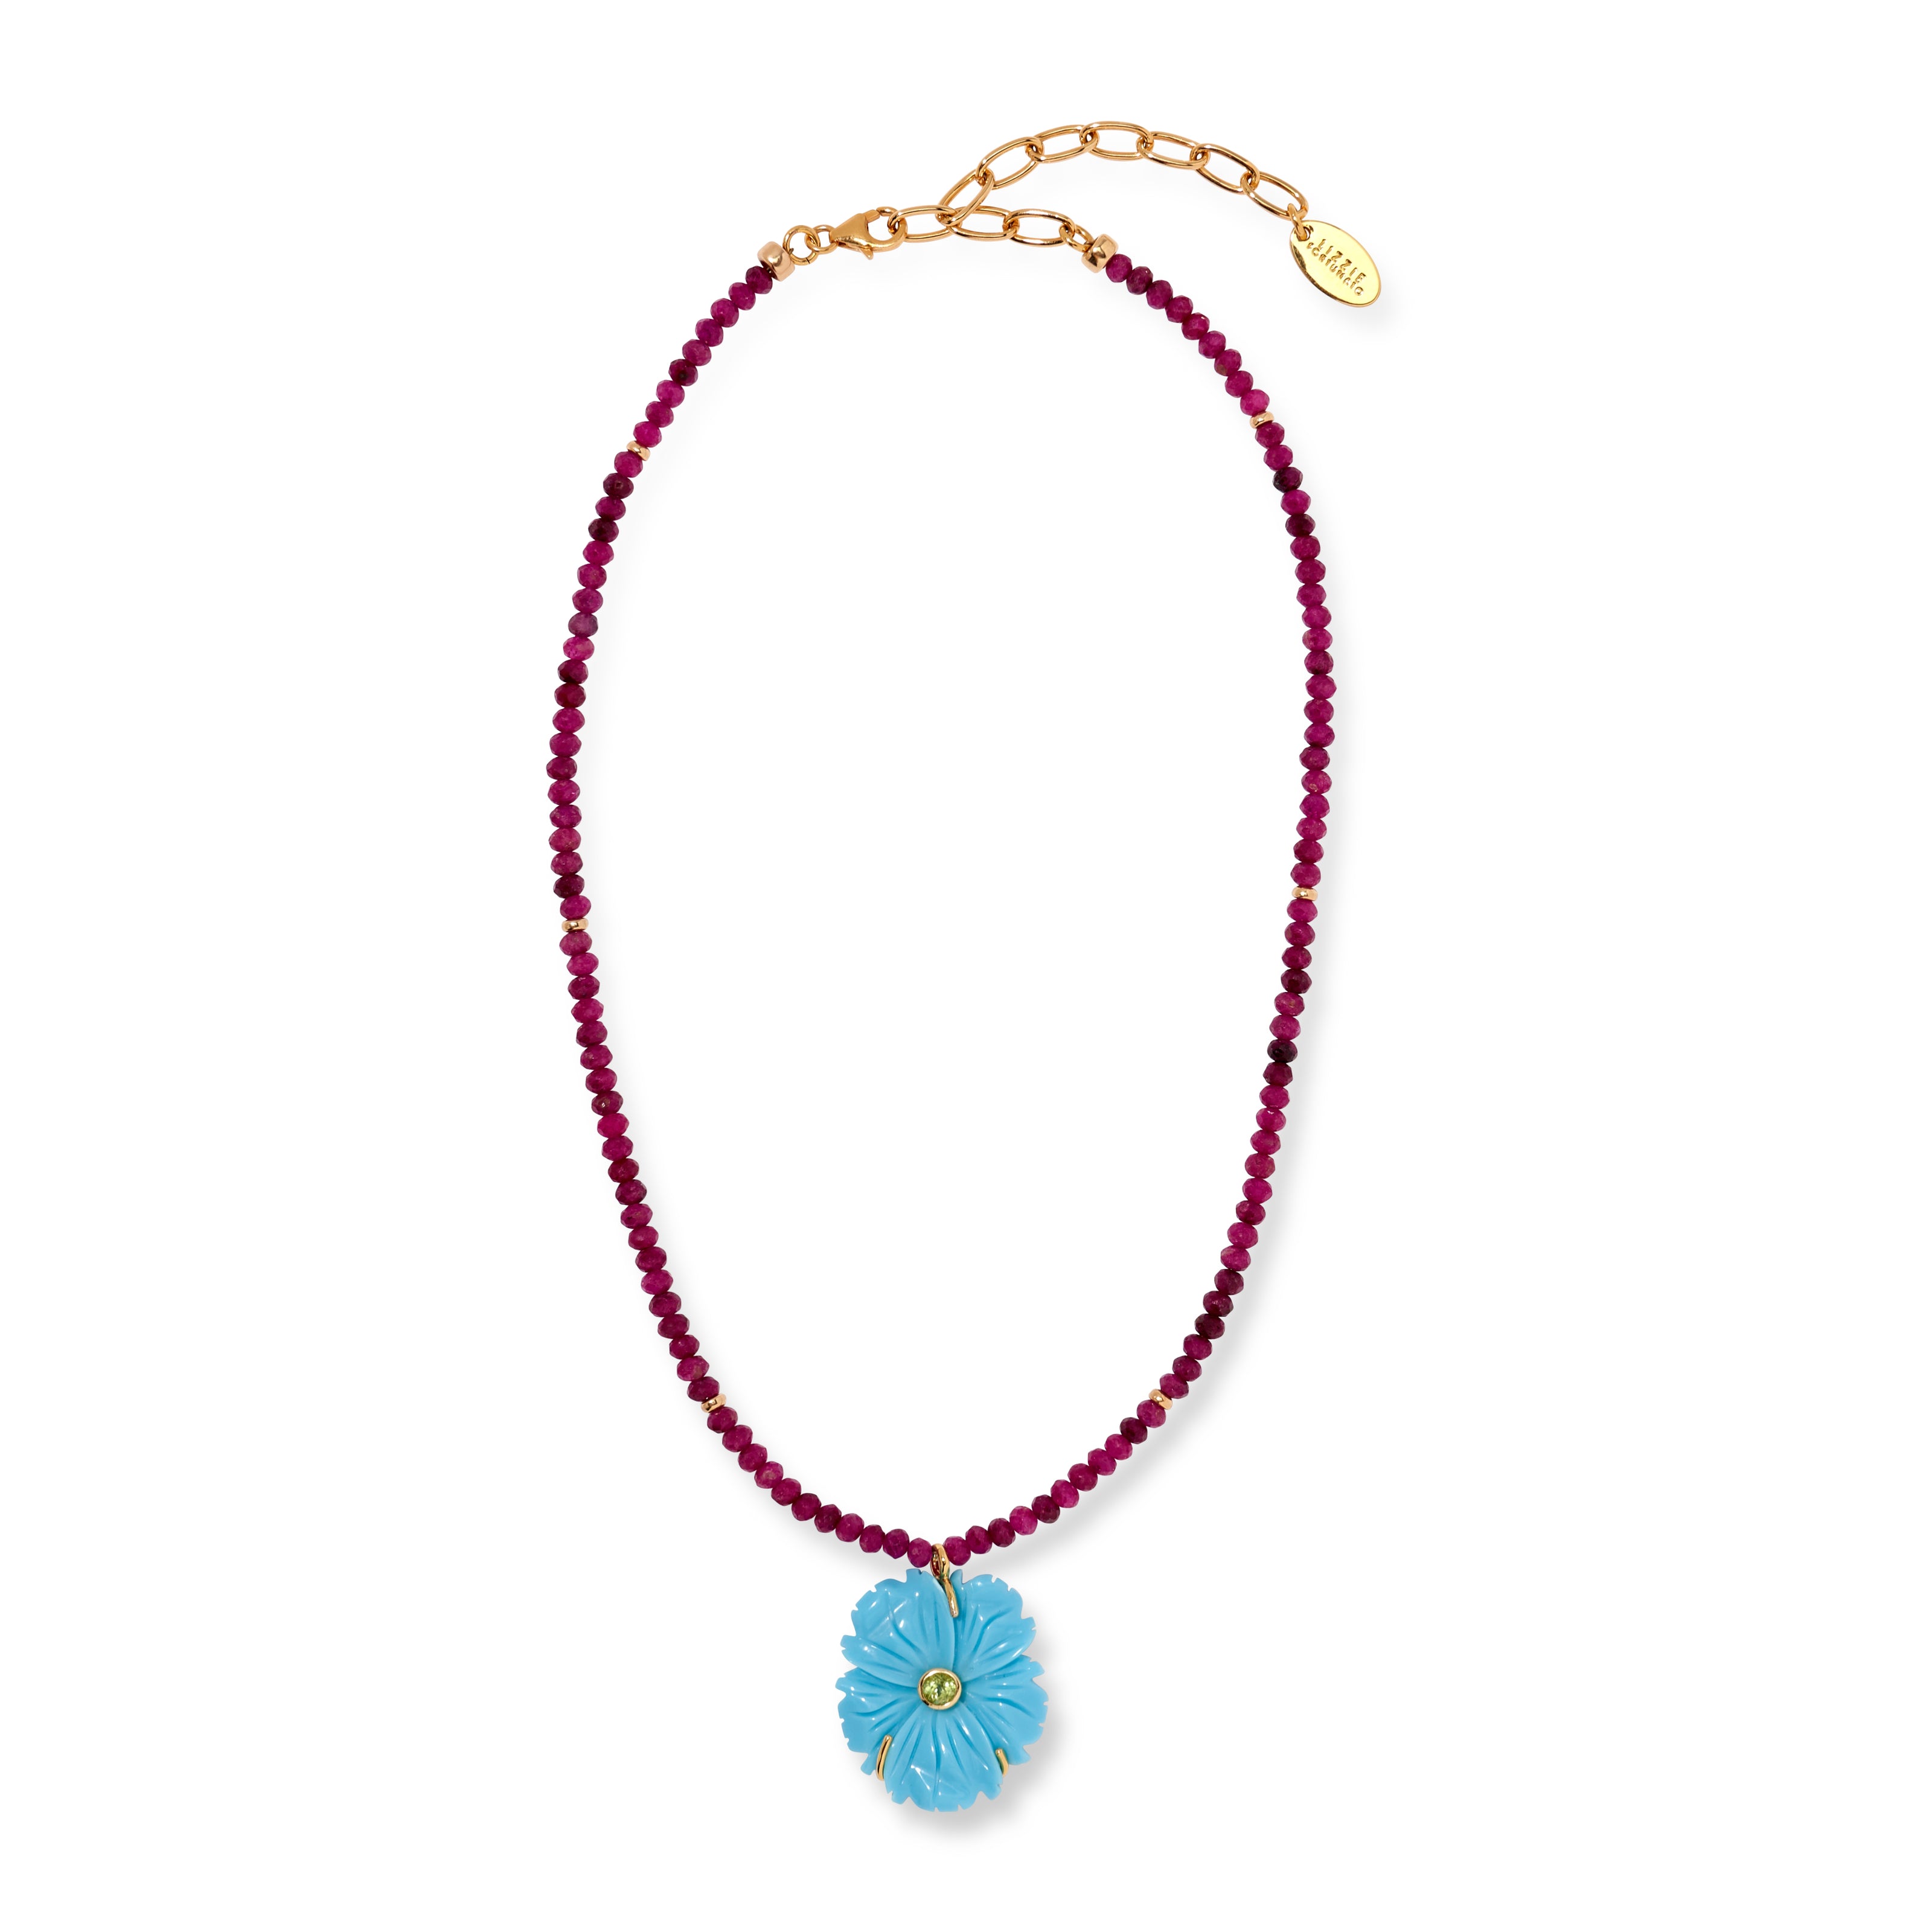 NEW BLOOM NECKLACE IN CERULEAN